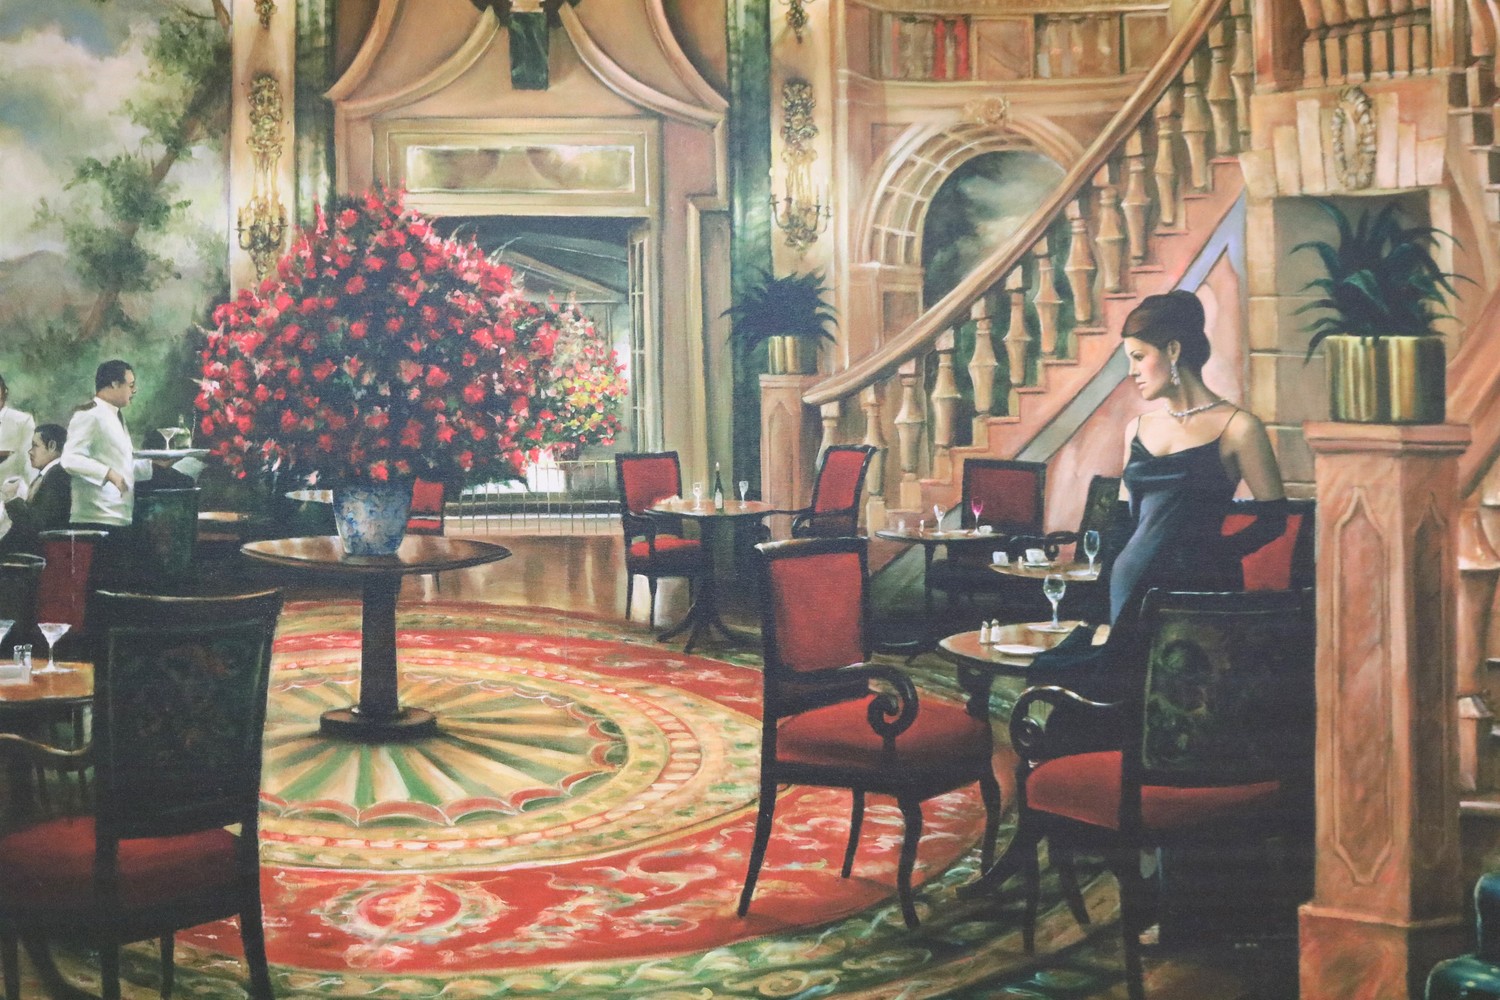 “Pierre's Tea Room” features an elegant hostess awaiting her guests’ arrival.